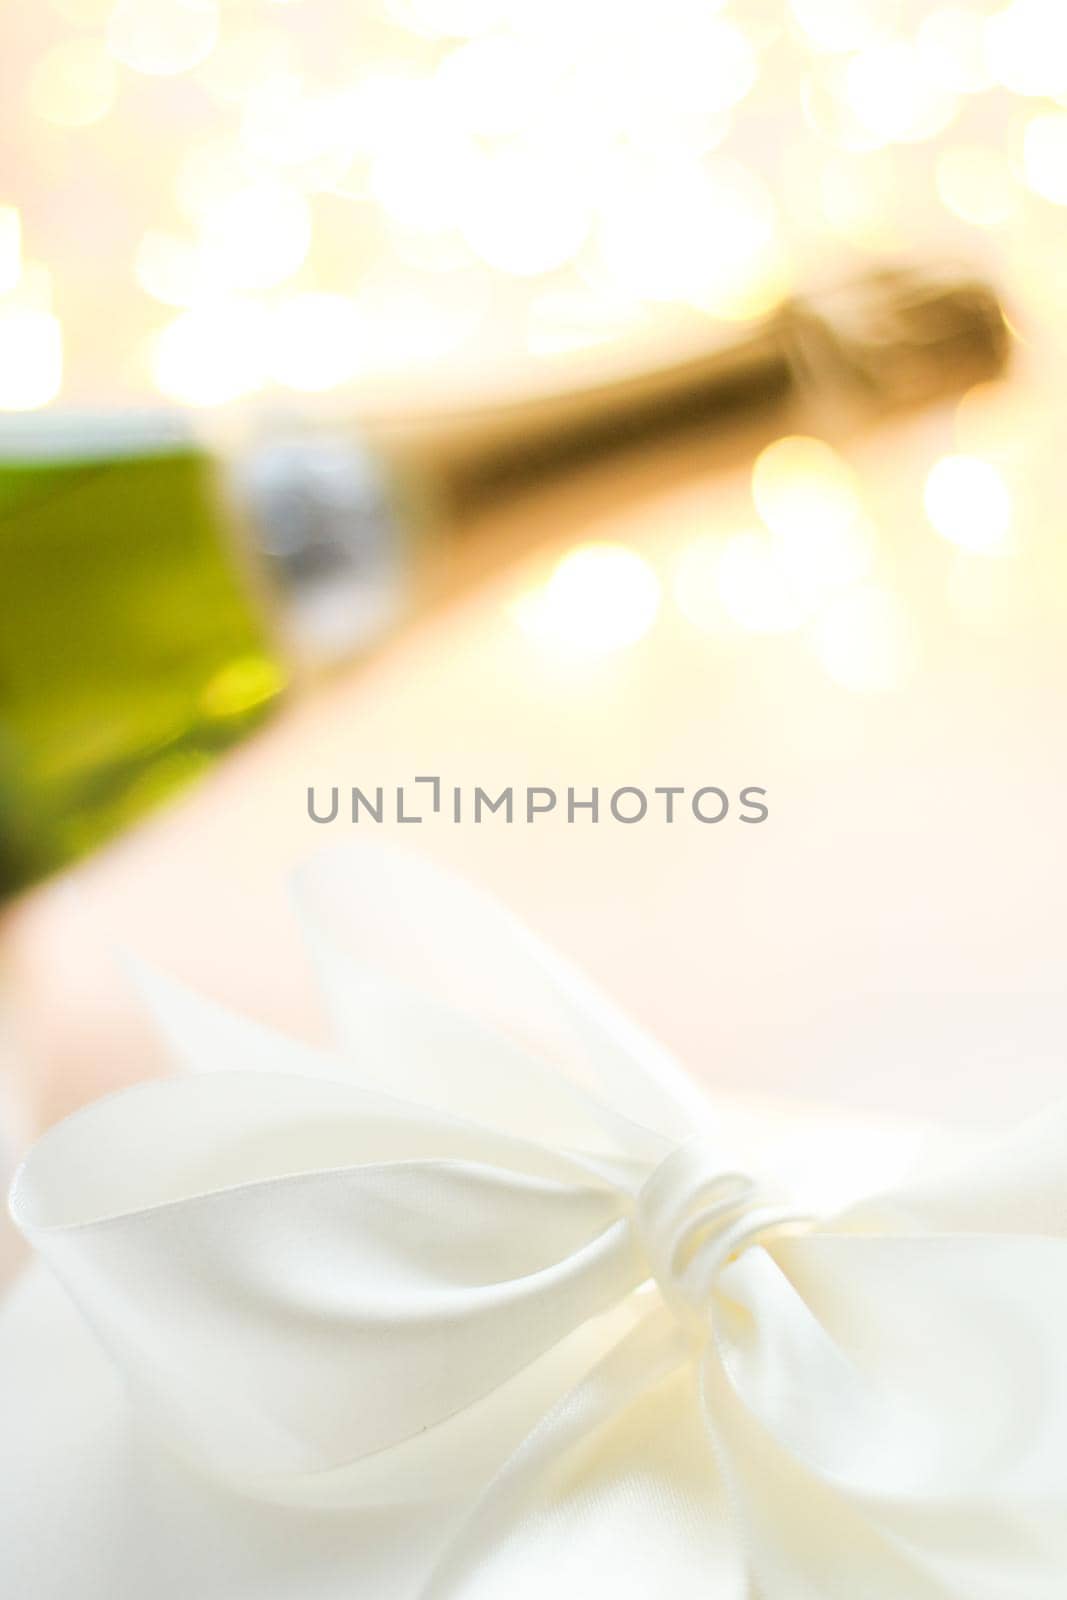 The bottle of champagne and holiday gift box by Anneleven